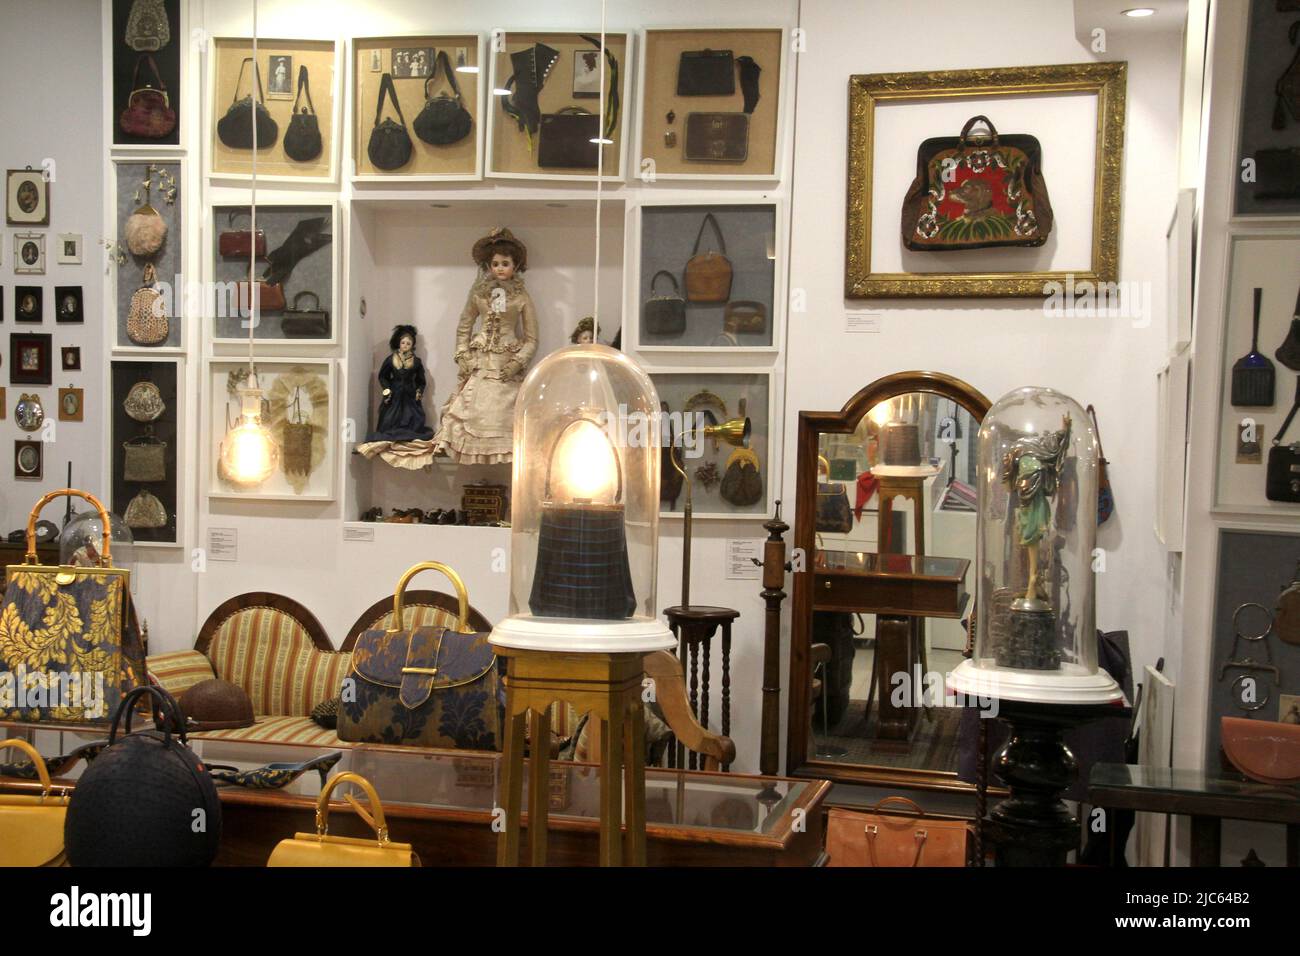 Bucharest, Romania. Inside the showroom of the famous fashion designer Dan Coma, with a display of luxurious handbags. Stock Photo